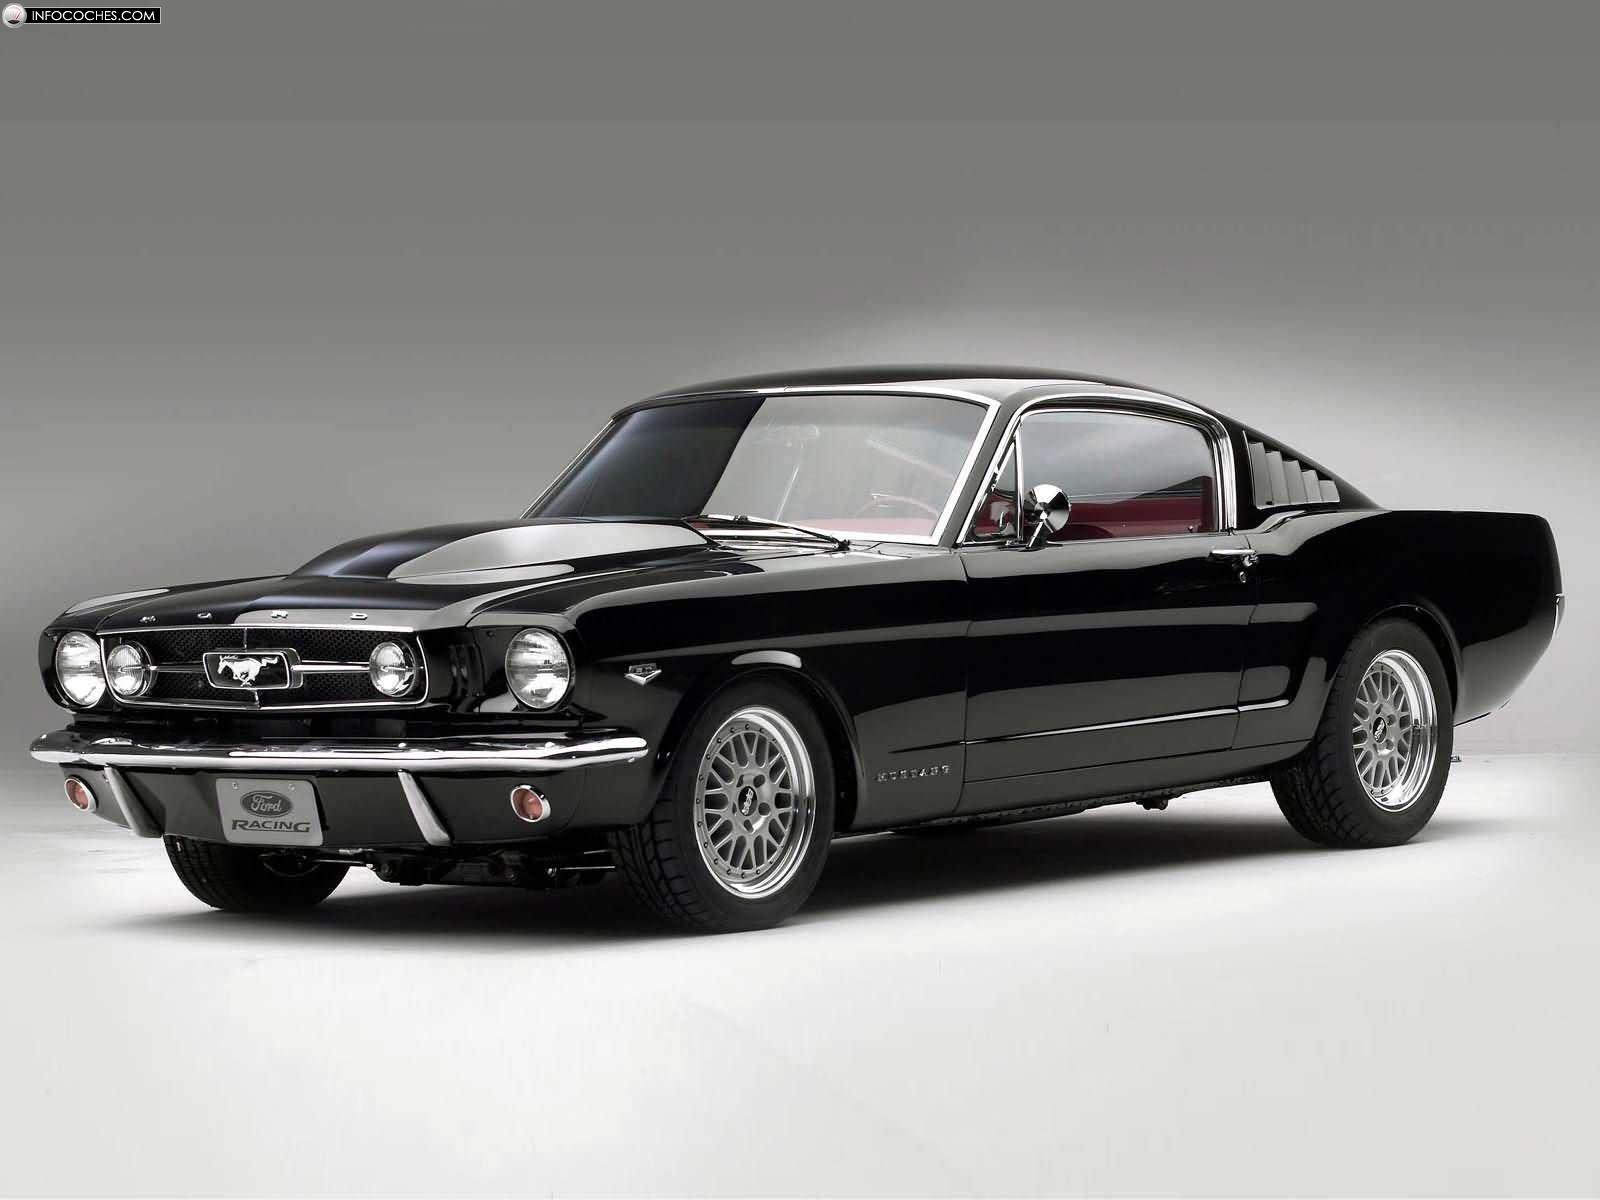 65 Mustang Resources: Wimbledon White 65 Shelby GT350 Fastback